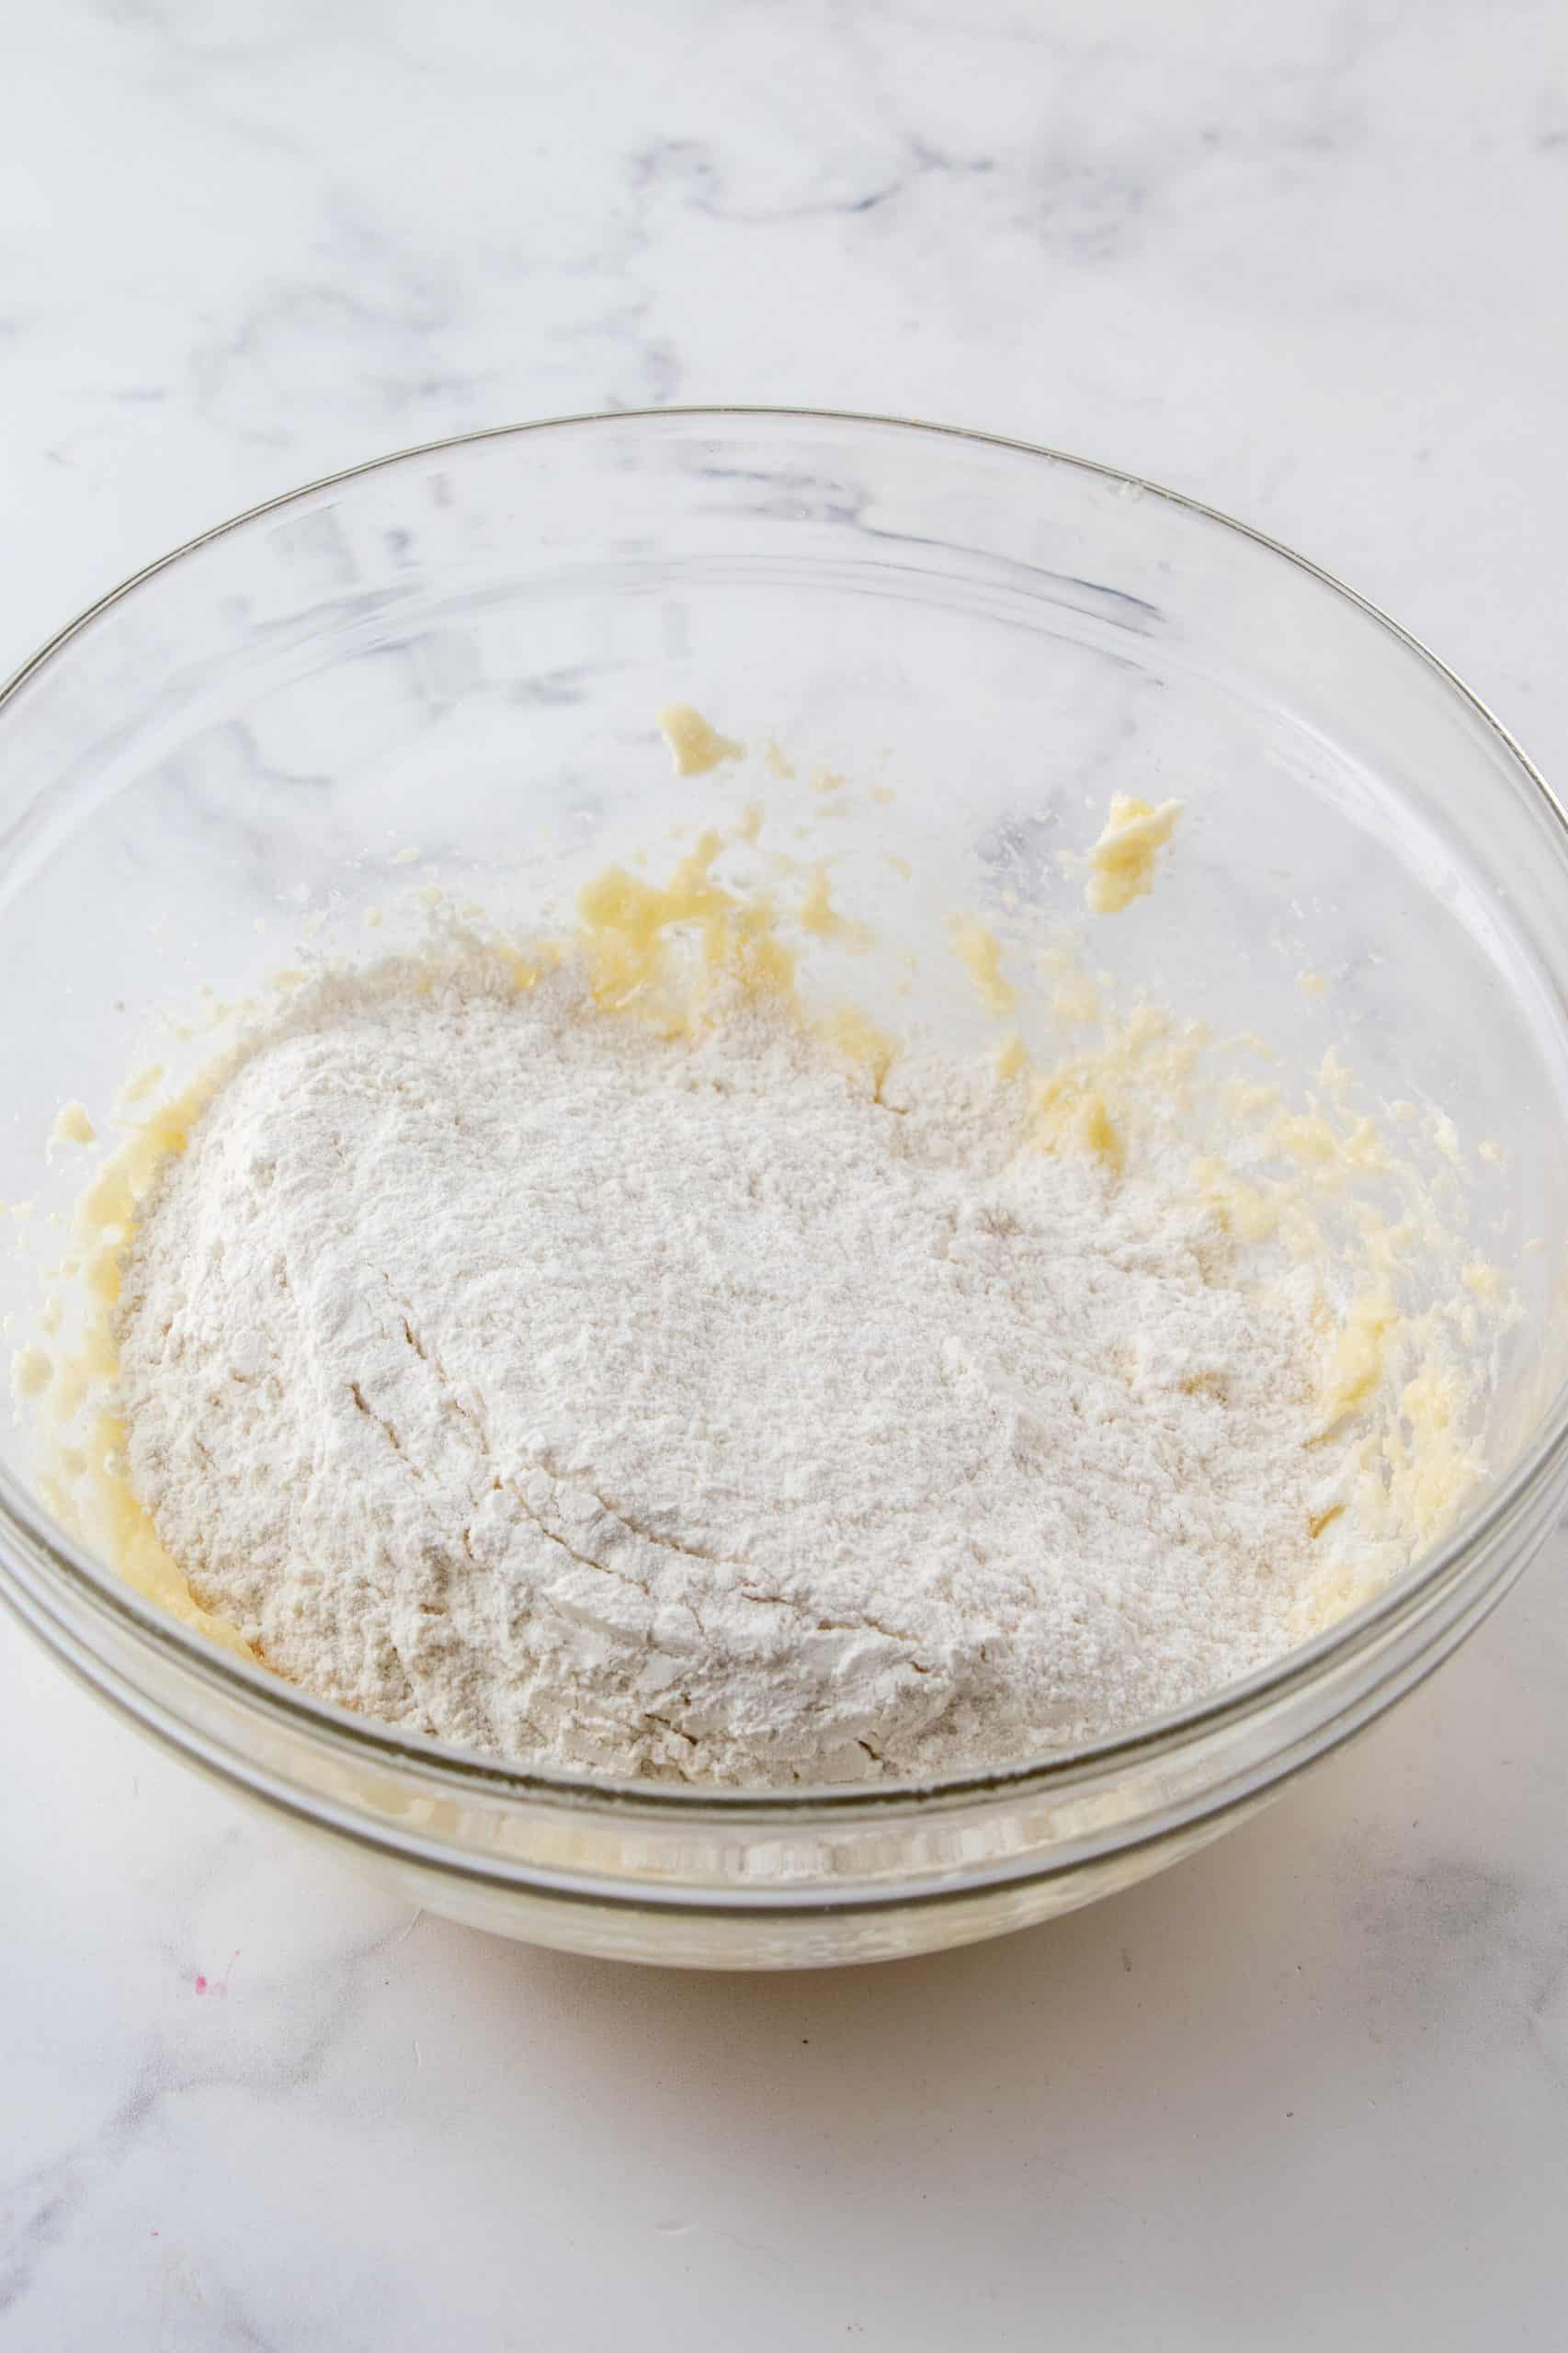 Dry ingredients added to butter mixture.